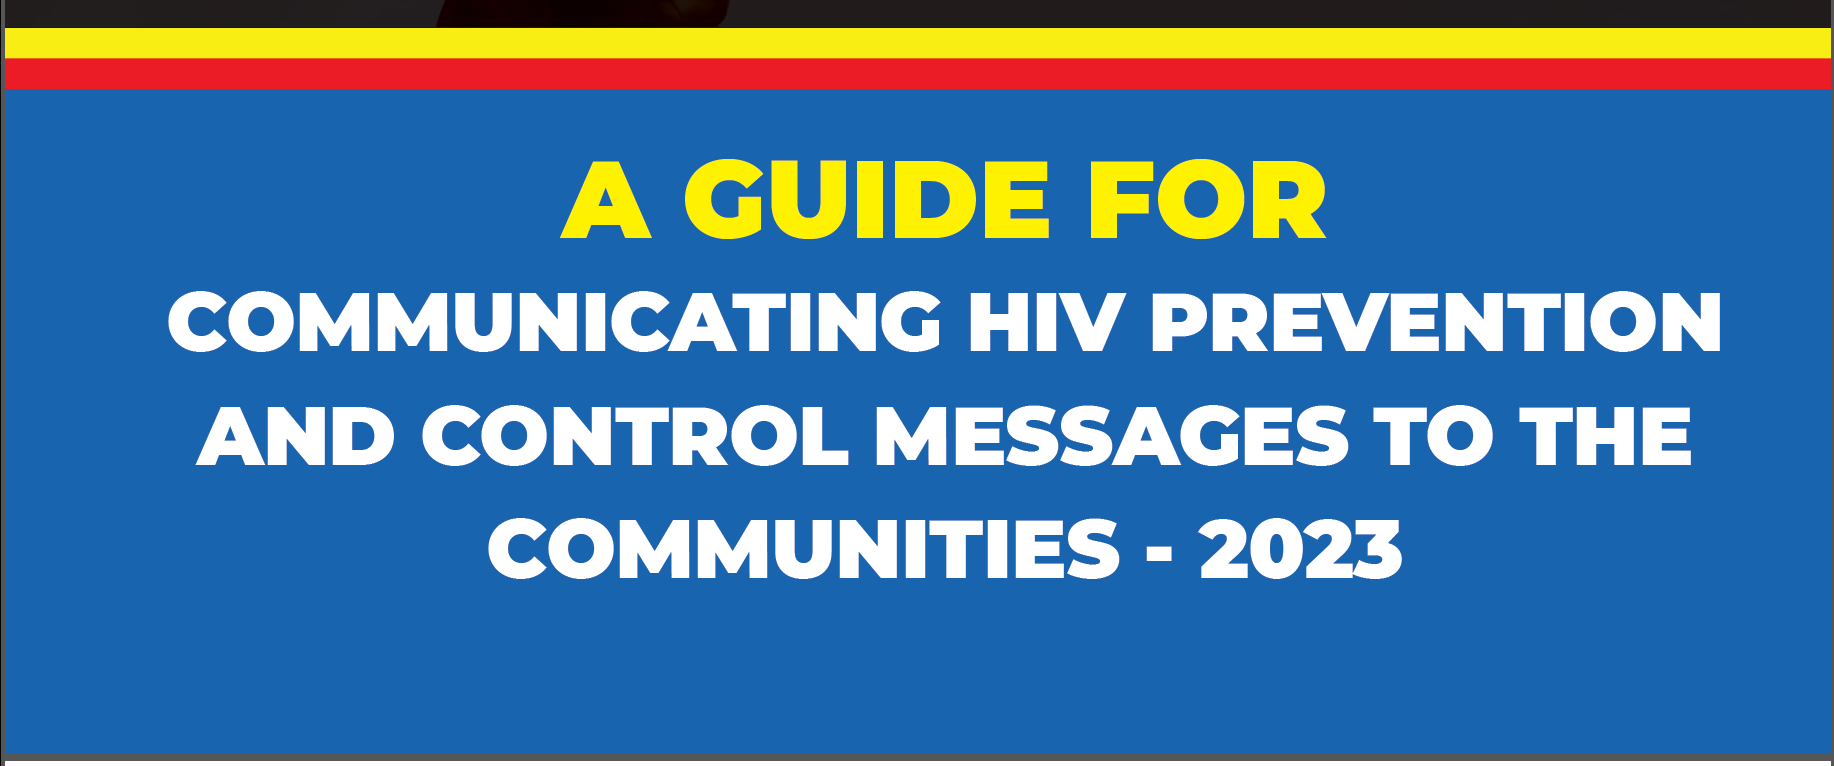 A GUIDE FOR  COMMUNICATING HIV PREVENTION AND CONTROL MESSAGES TO THE  COMMUNITIES - 2023